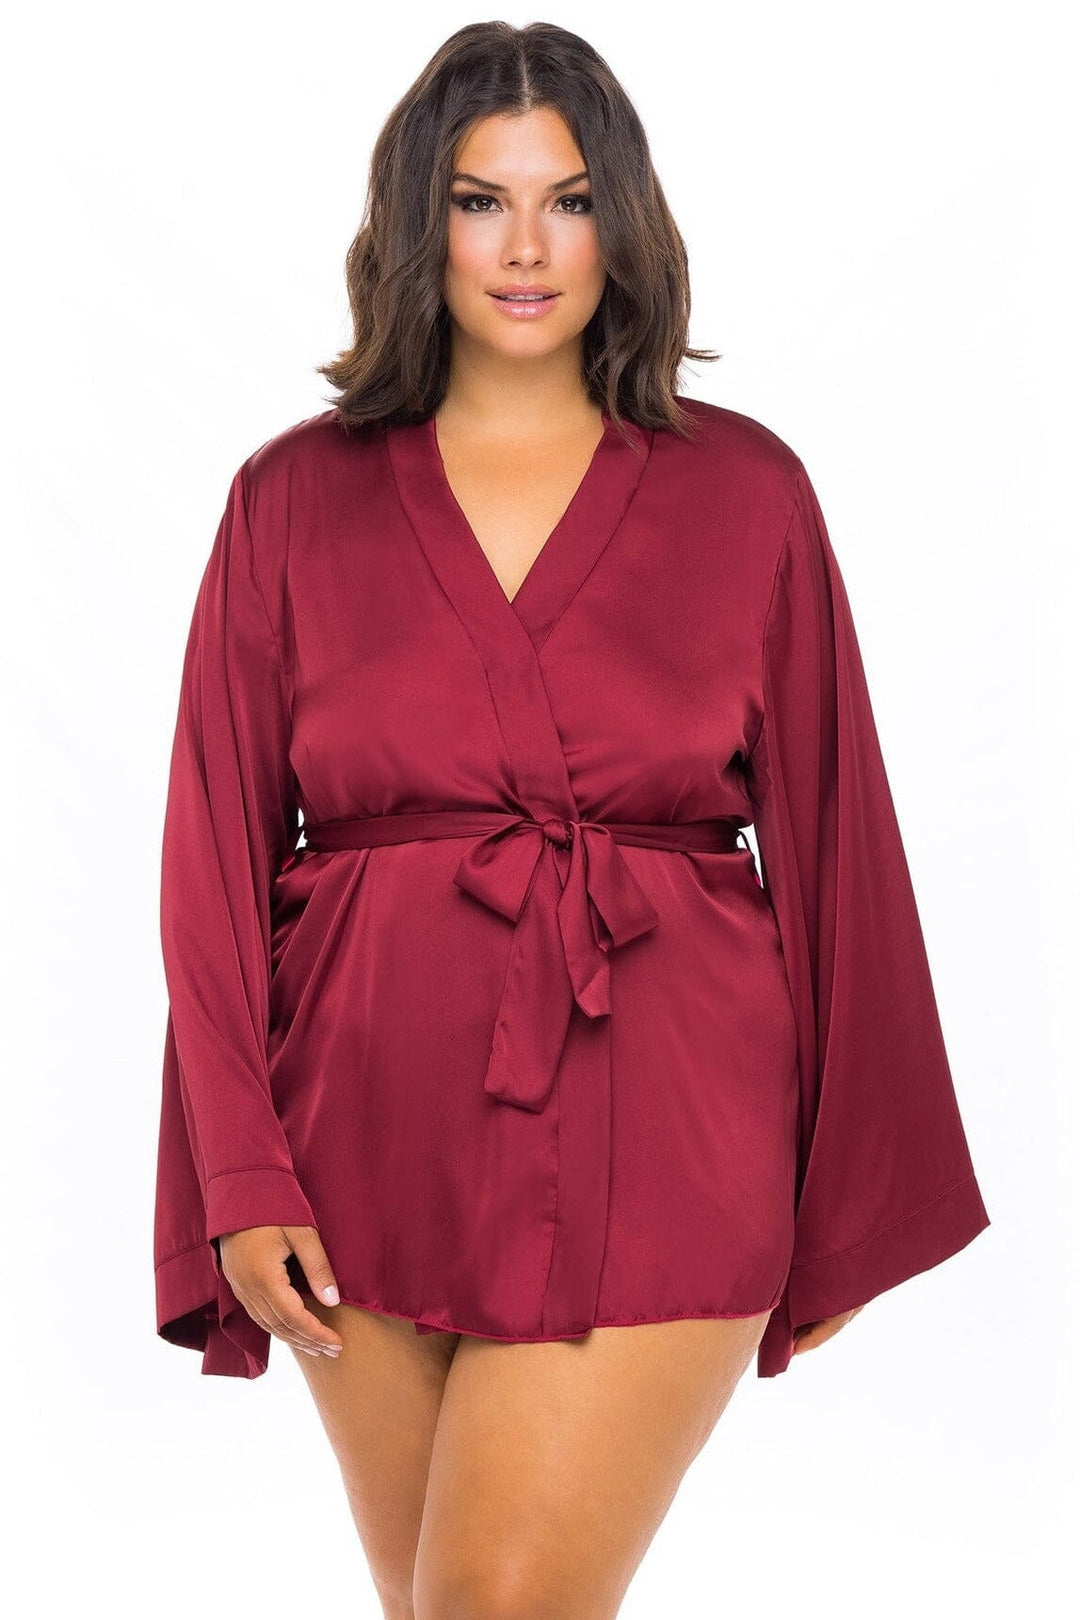 Short Wide Sleeved Robe-Gowns + Robes-Oh La La Cheri-Red-1X/2XL-SEXYSHOES.COM